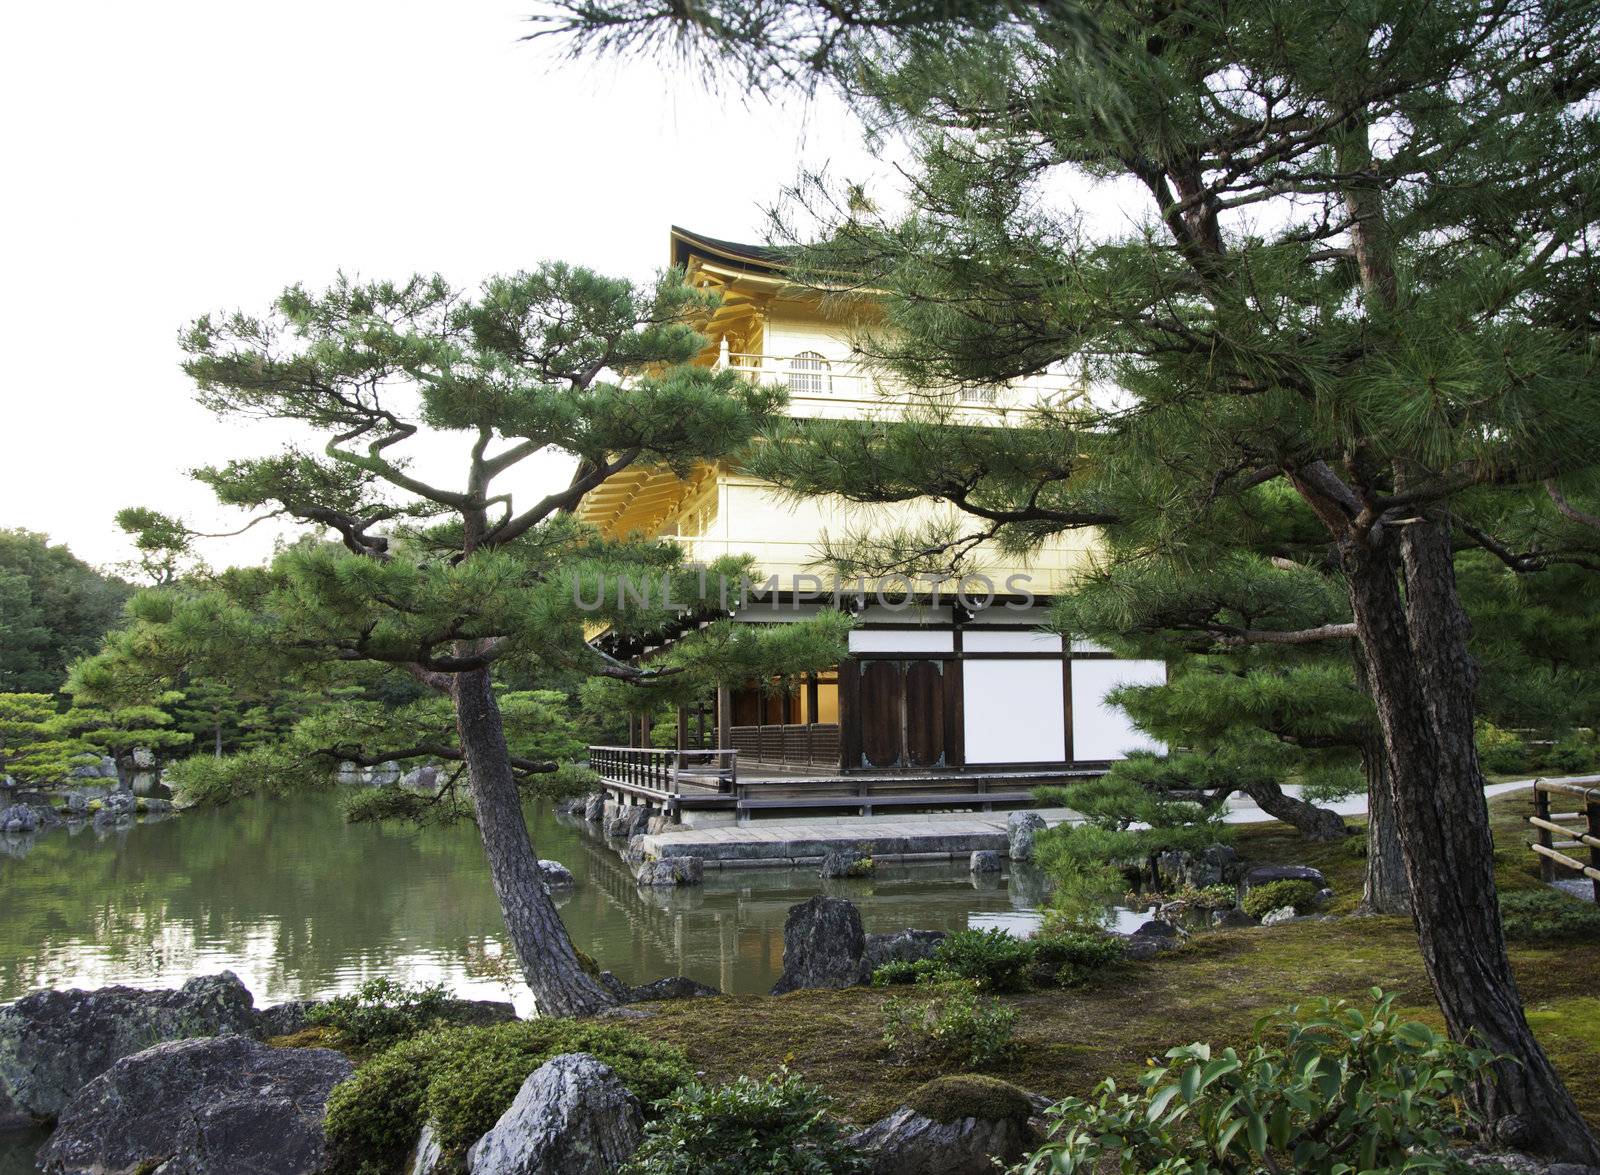 Kinkakuji (Golden Pavilion) is a Zen temple in northern Kyoto, J by siraanamwong